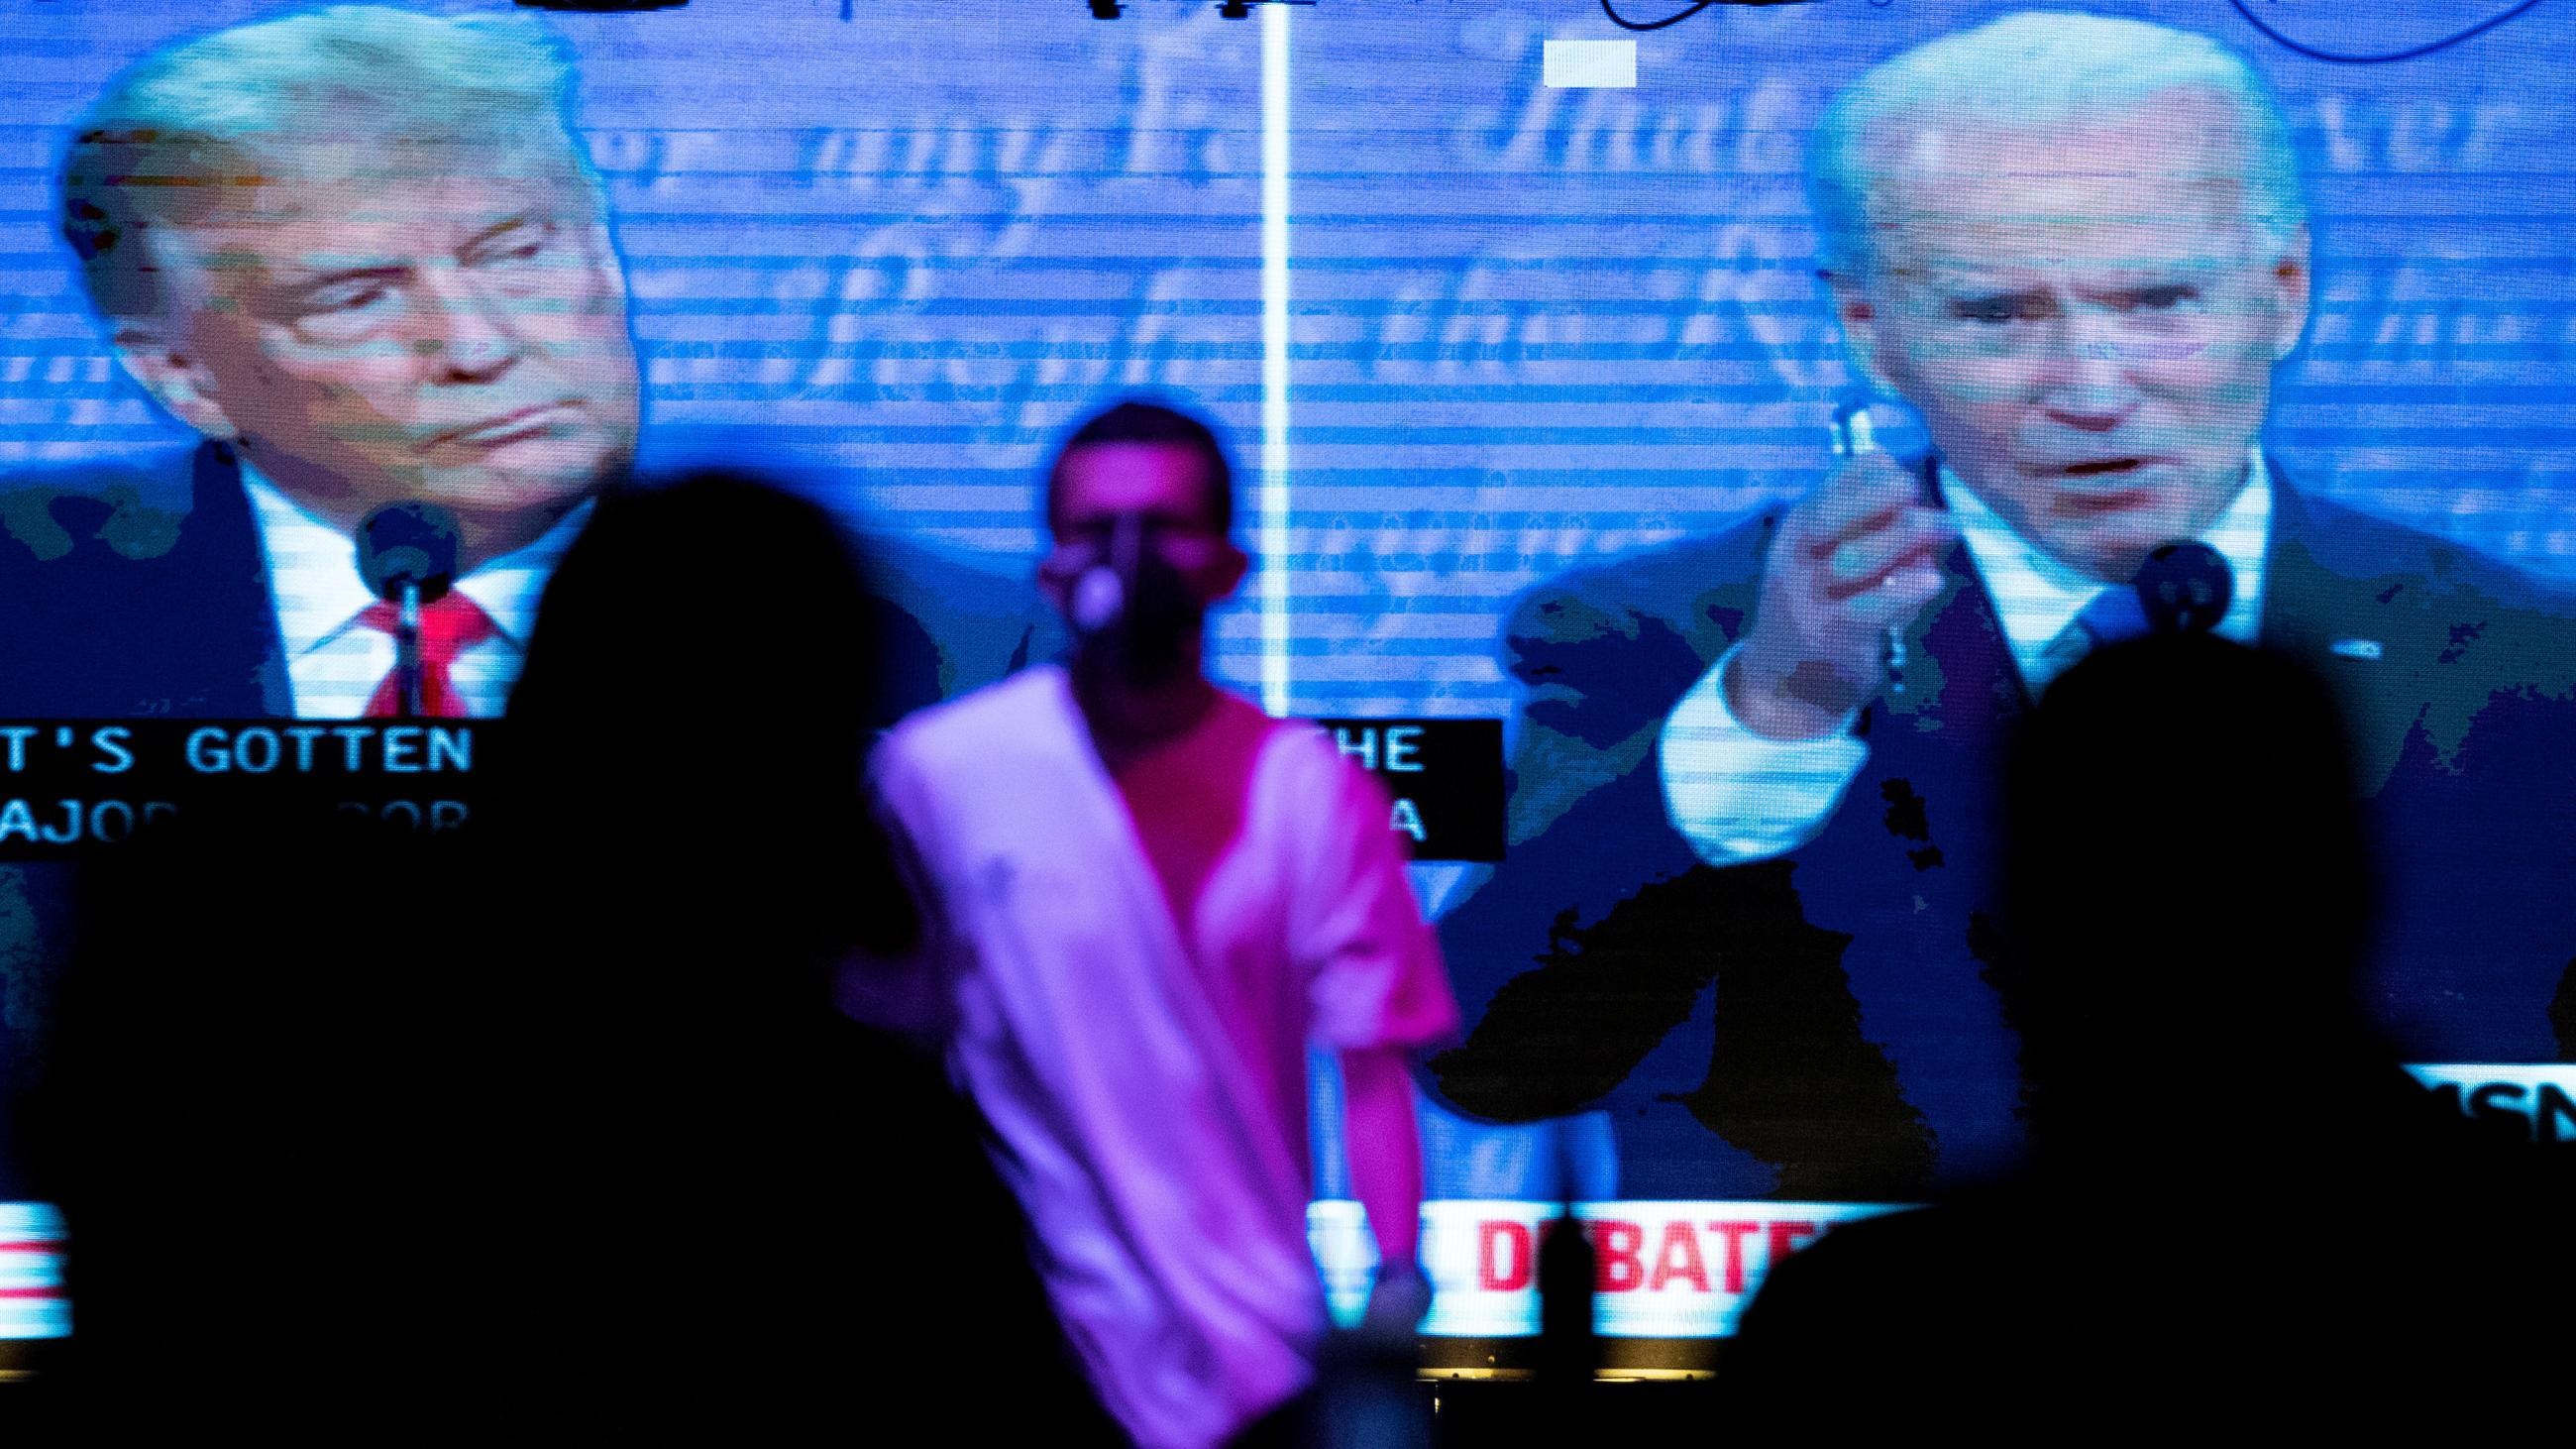 People watch the second presidential debate between Democratic presidential nominee Joe Biden and U.S. President Donald Trump during the COVID-19 outbreak in West Hollywood, California, on October 22, 2020.